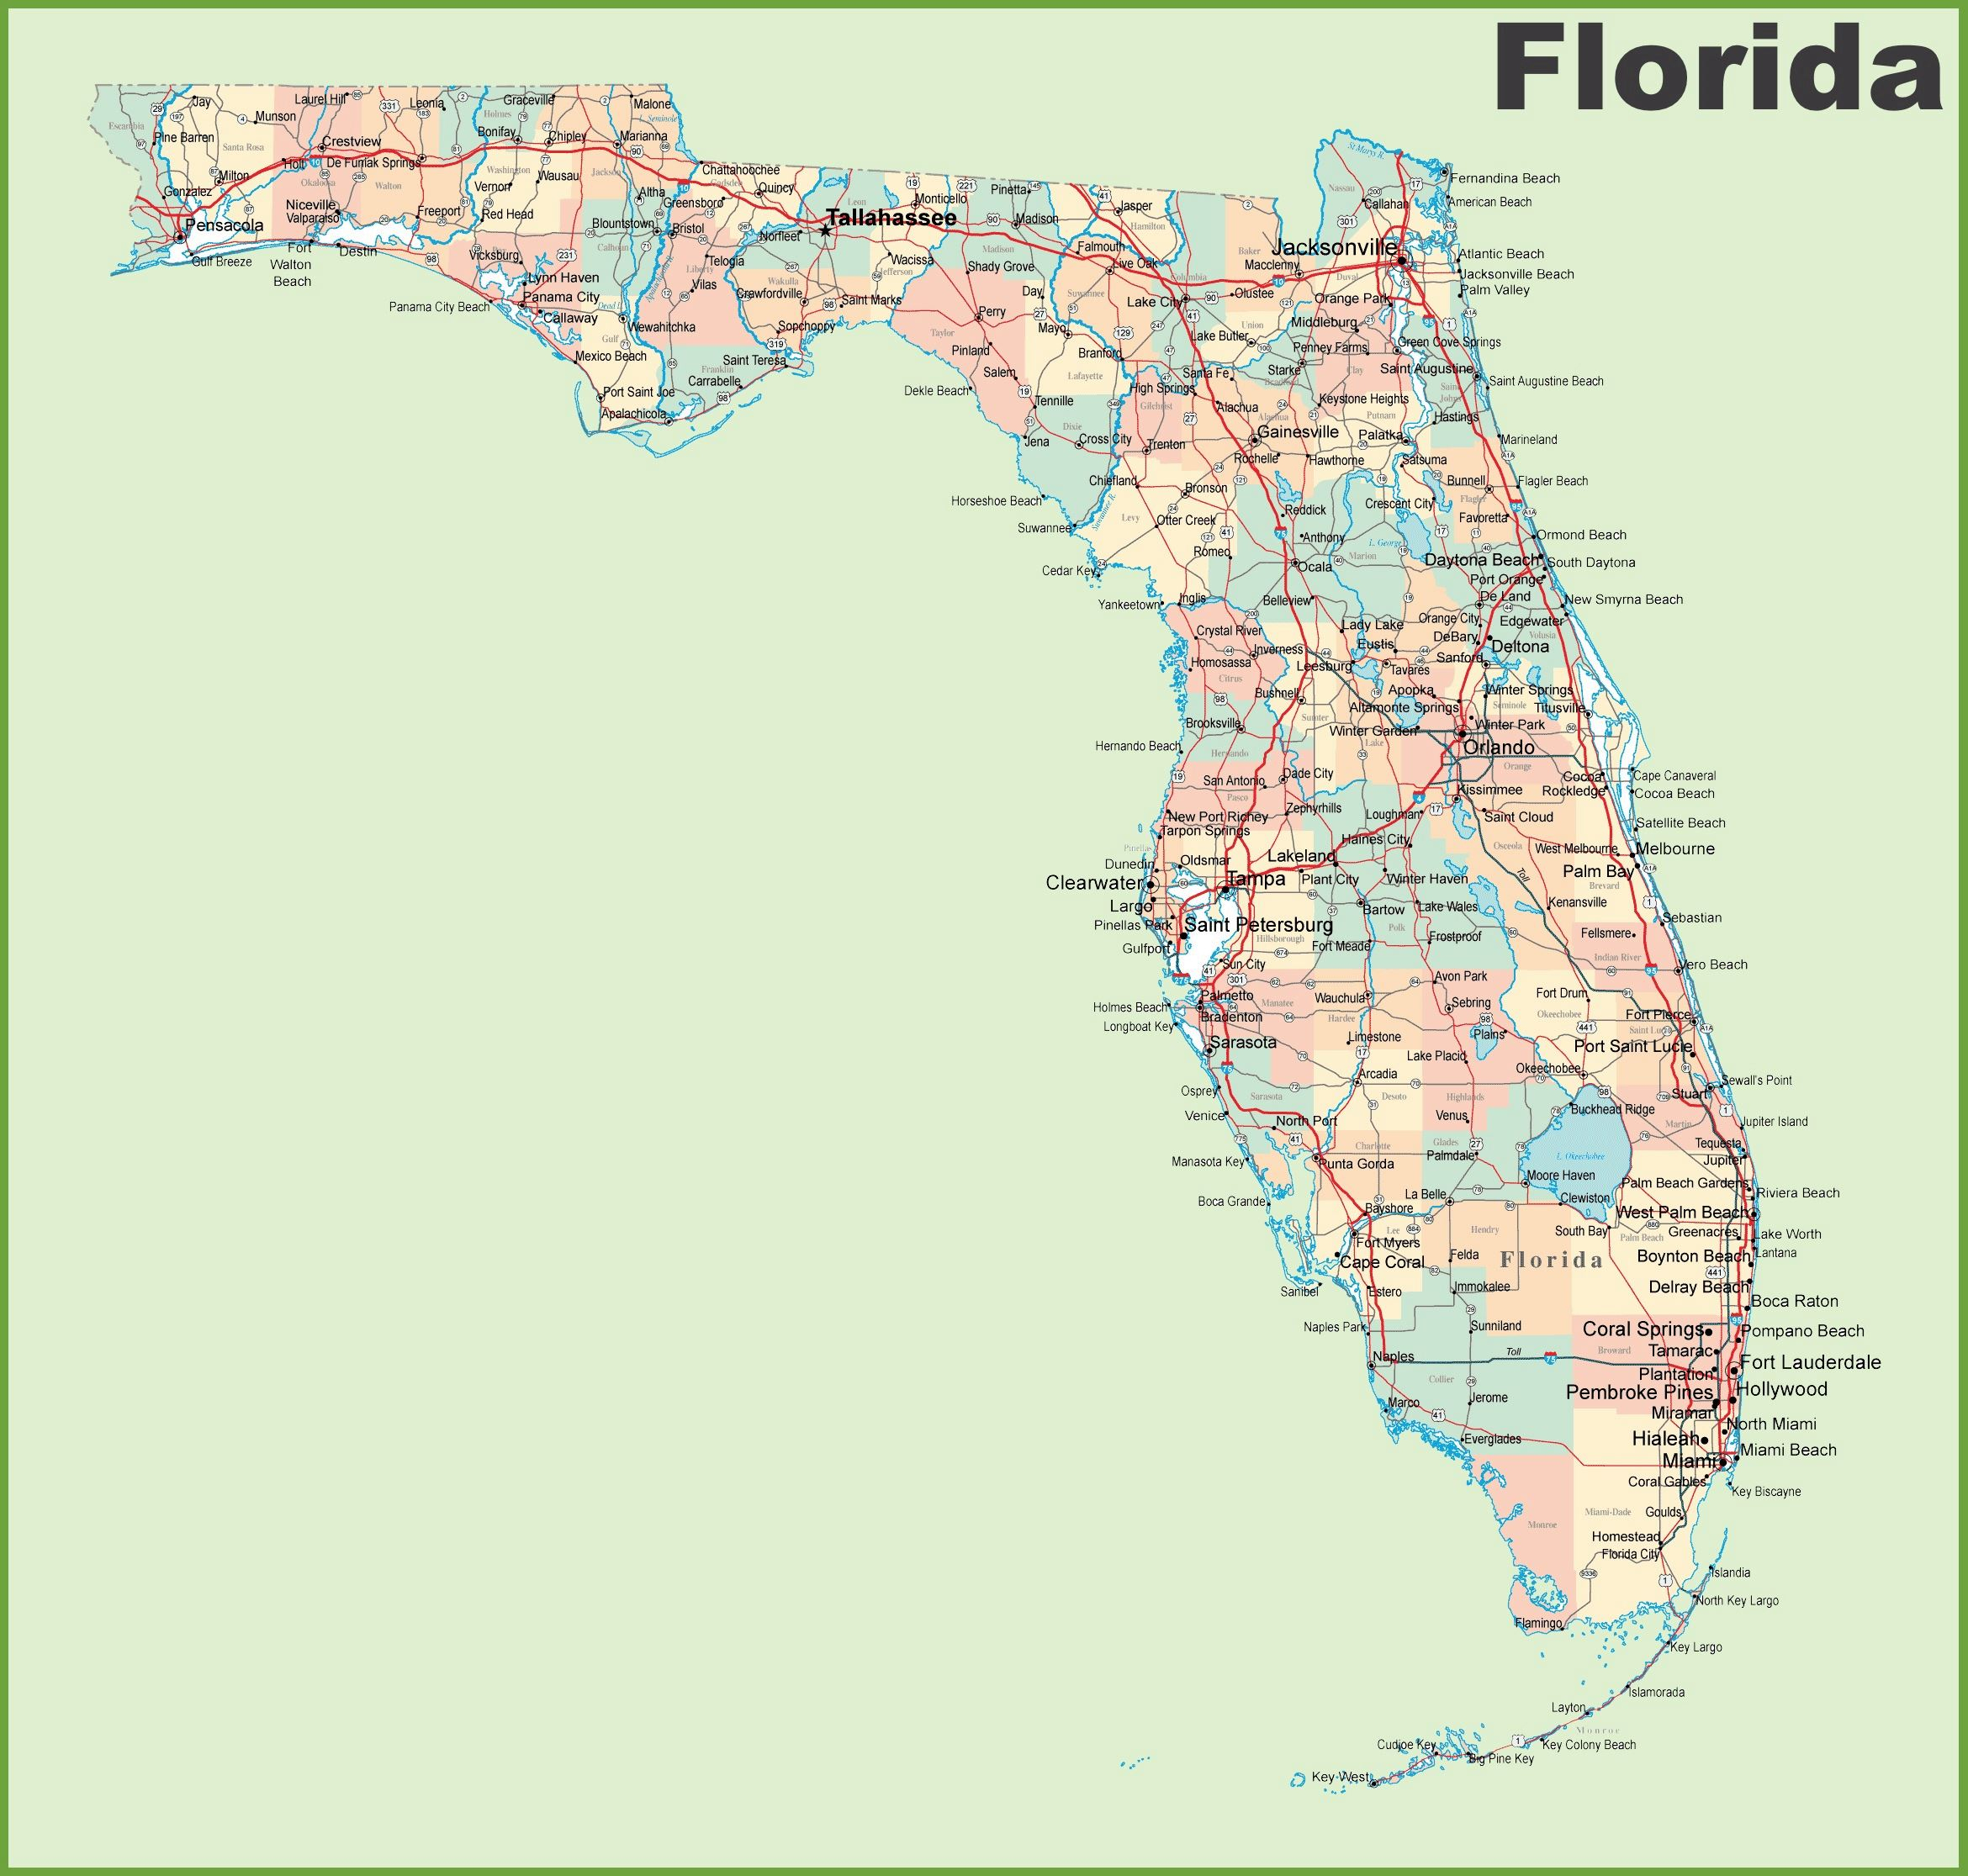 Large Florida Maps For Free Download And Print | High-Resolution And - Road Map Of North Florida